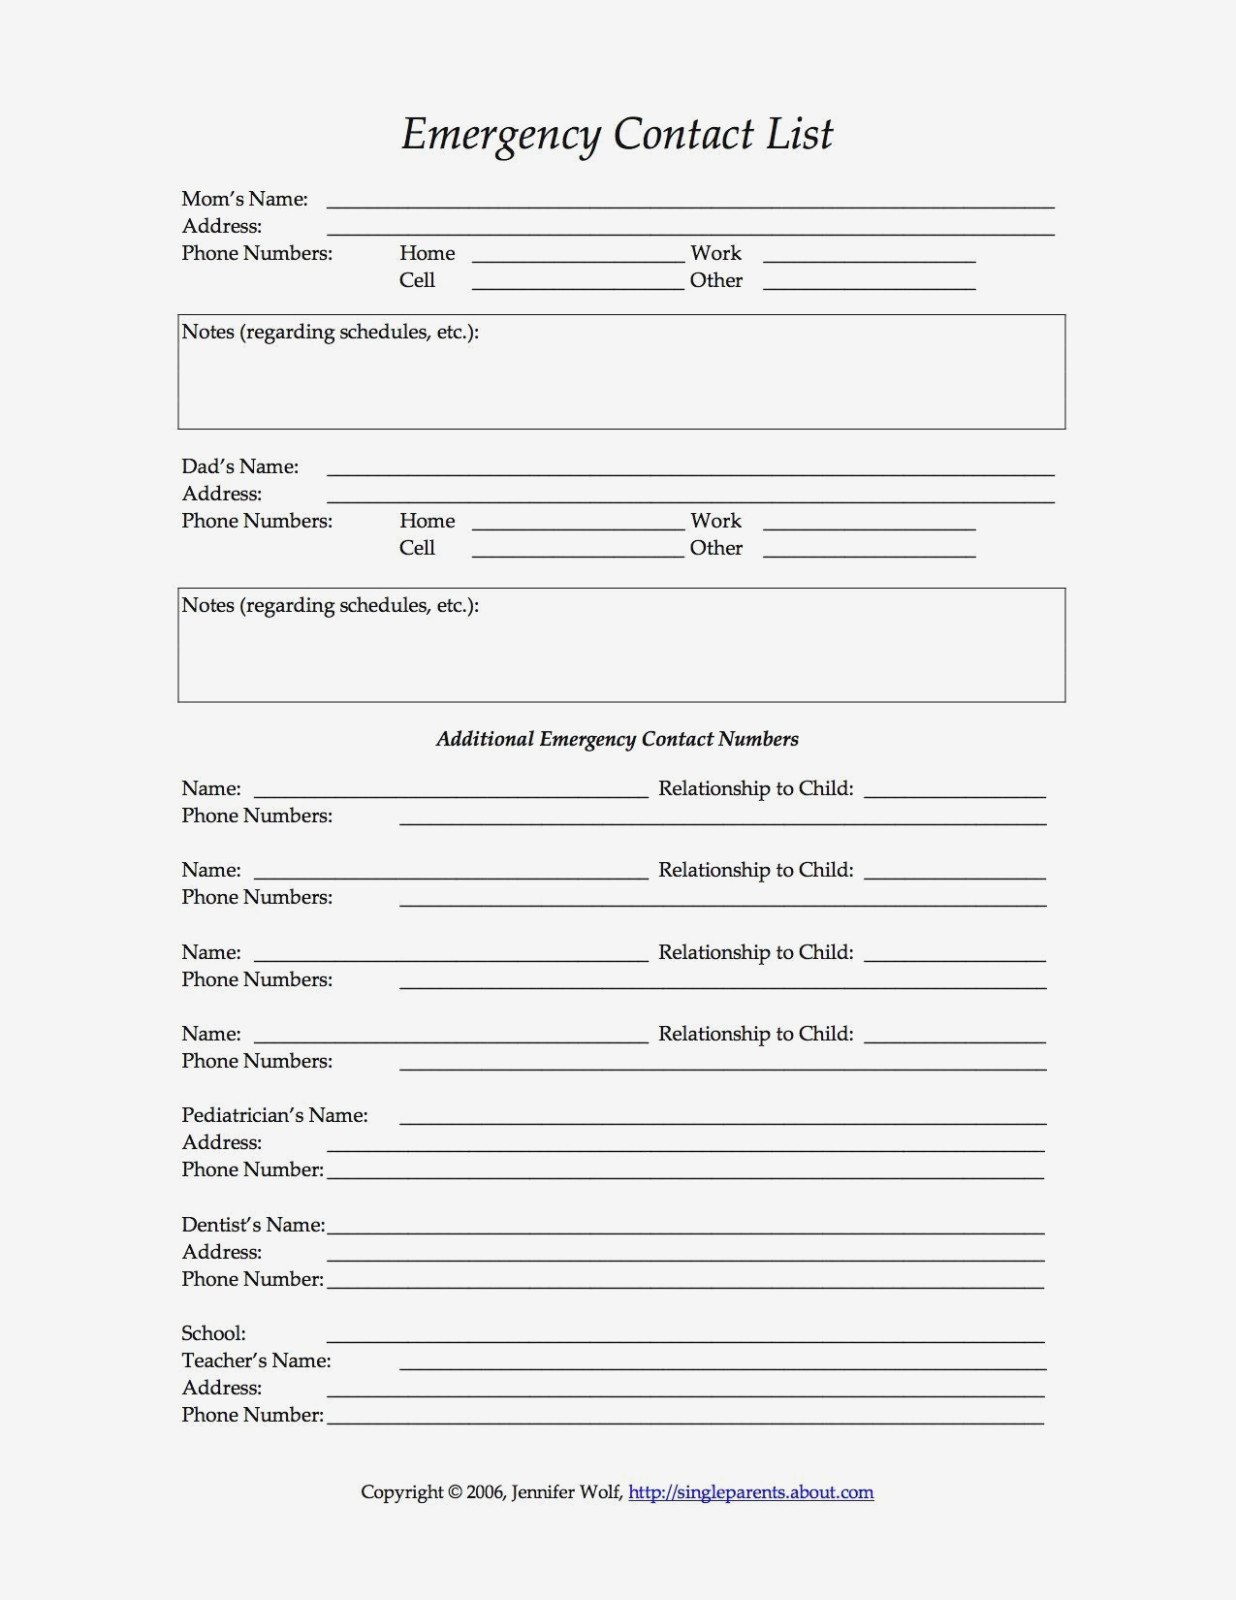 13 Free Printable Forms For Single Parents | Daycare: Recipes, Forms - Free Printable Daycare Forms For Parents